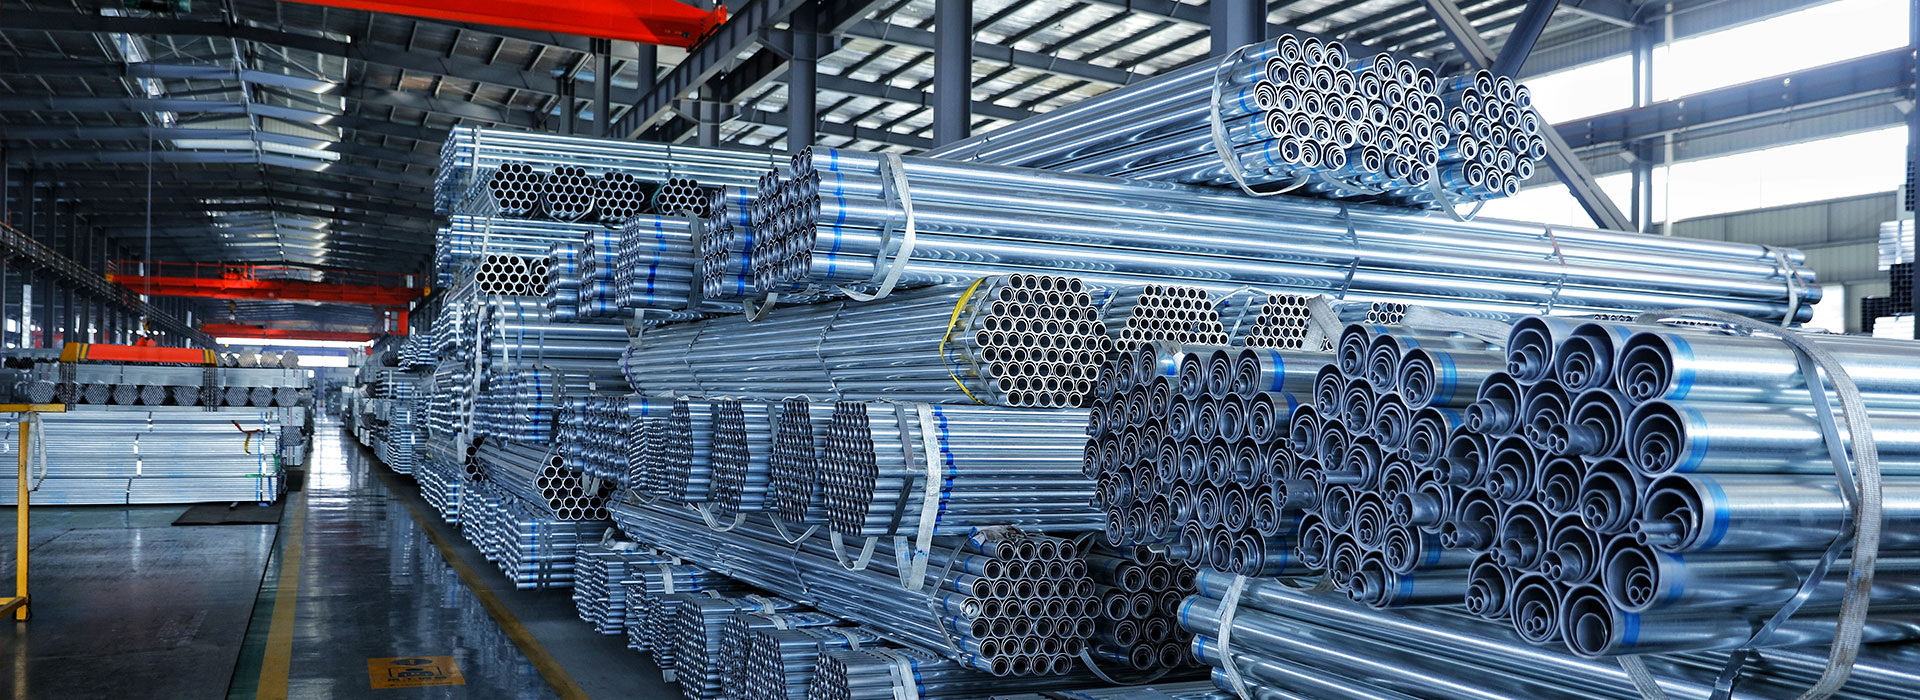 Cold Rolled Hollow Section Pre-Galvanized Steel Pipe Manufacturer